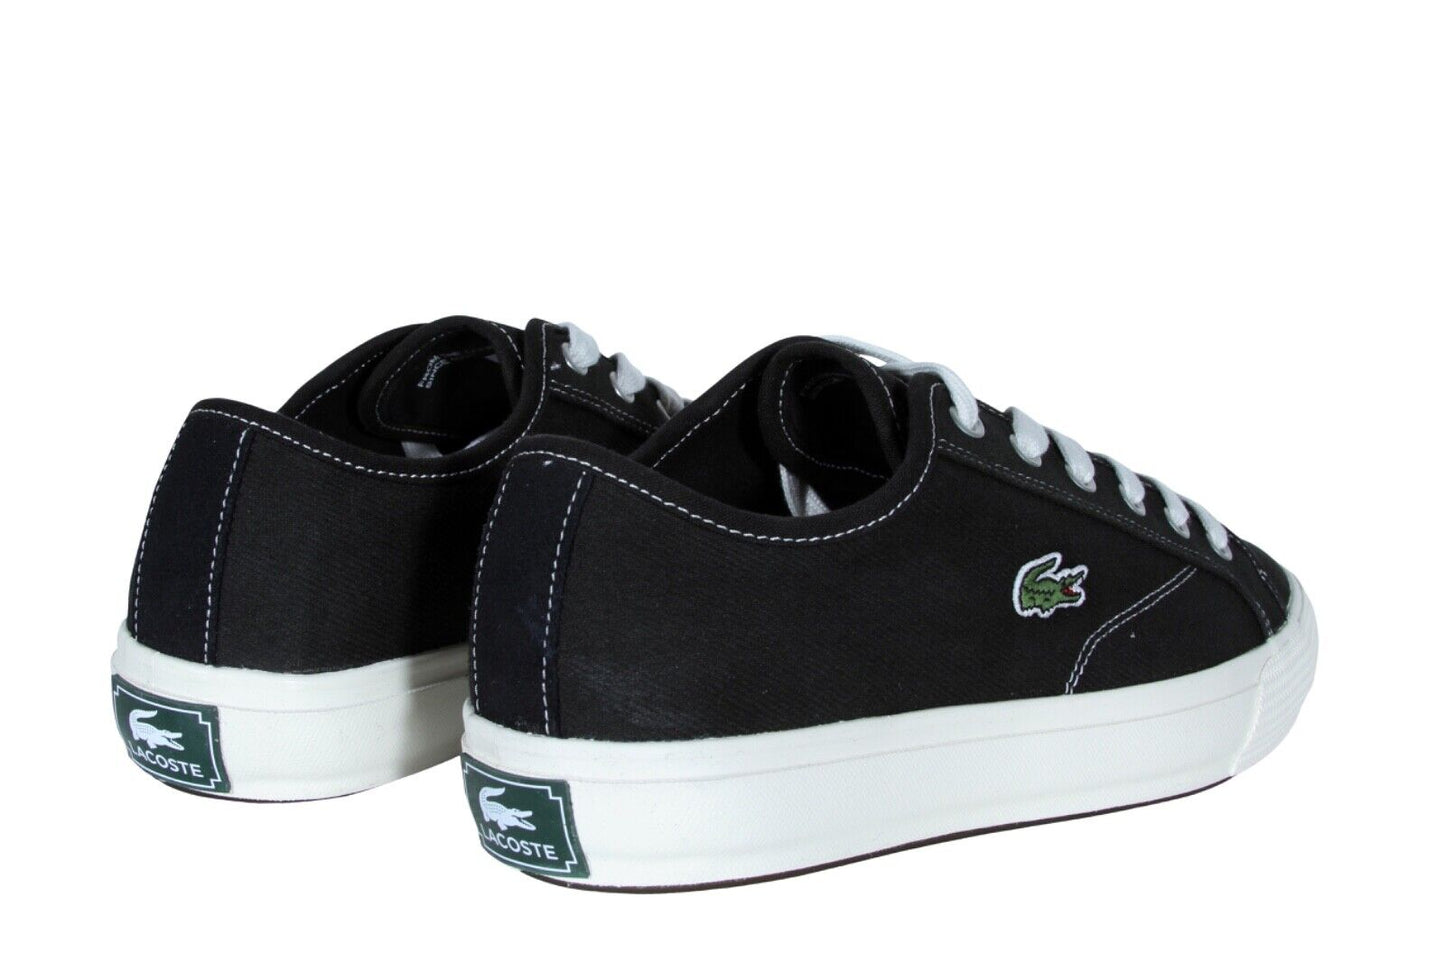 Lacoste Backcourt 124 1 CMA Men's Trainers in Black and Off White 747CMA0005454